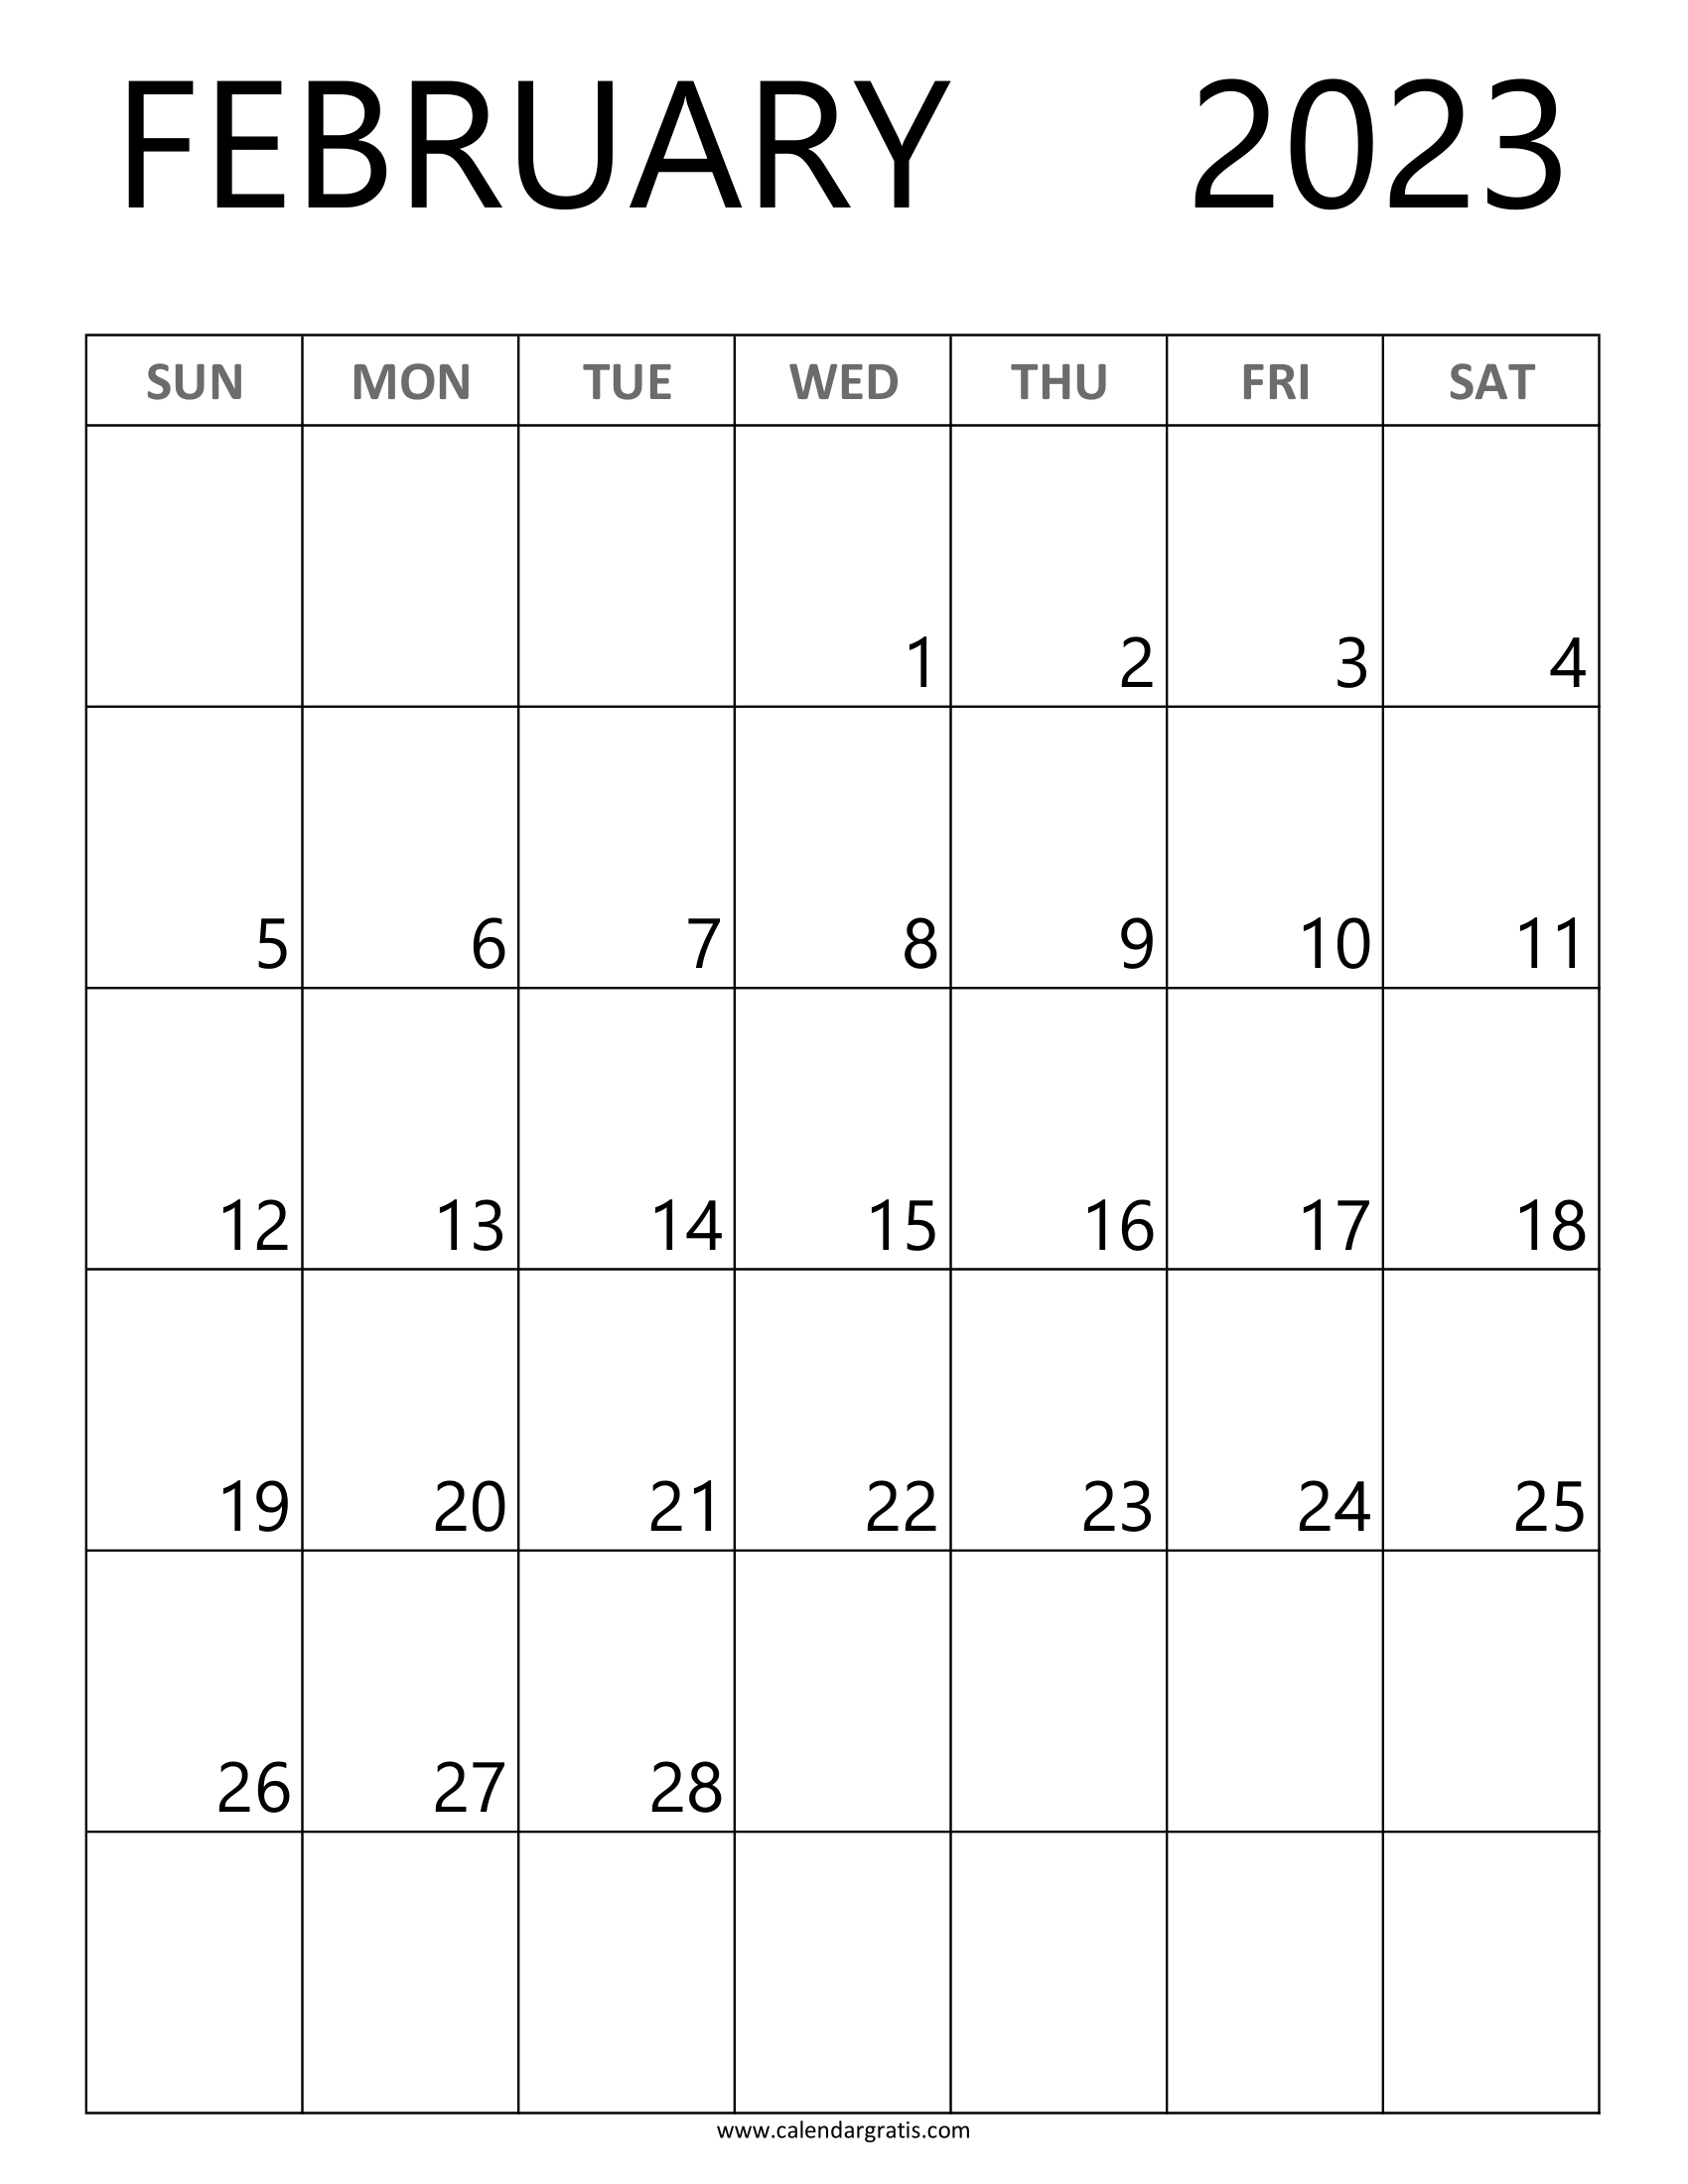 Free Printable A4 Size Calendar for February 2023. Instant download monthly calendar template in a vertical layout.